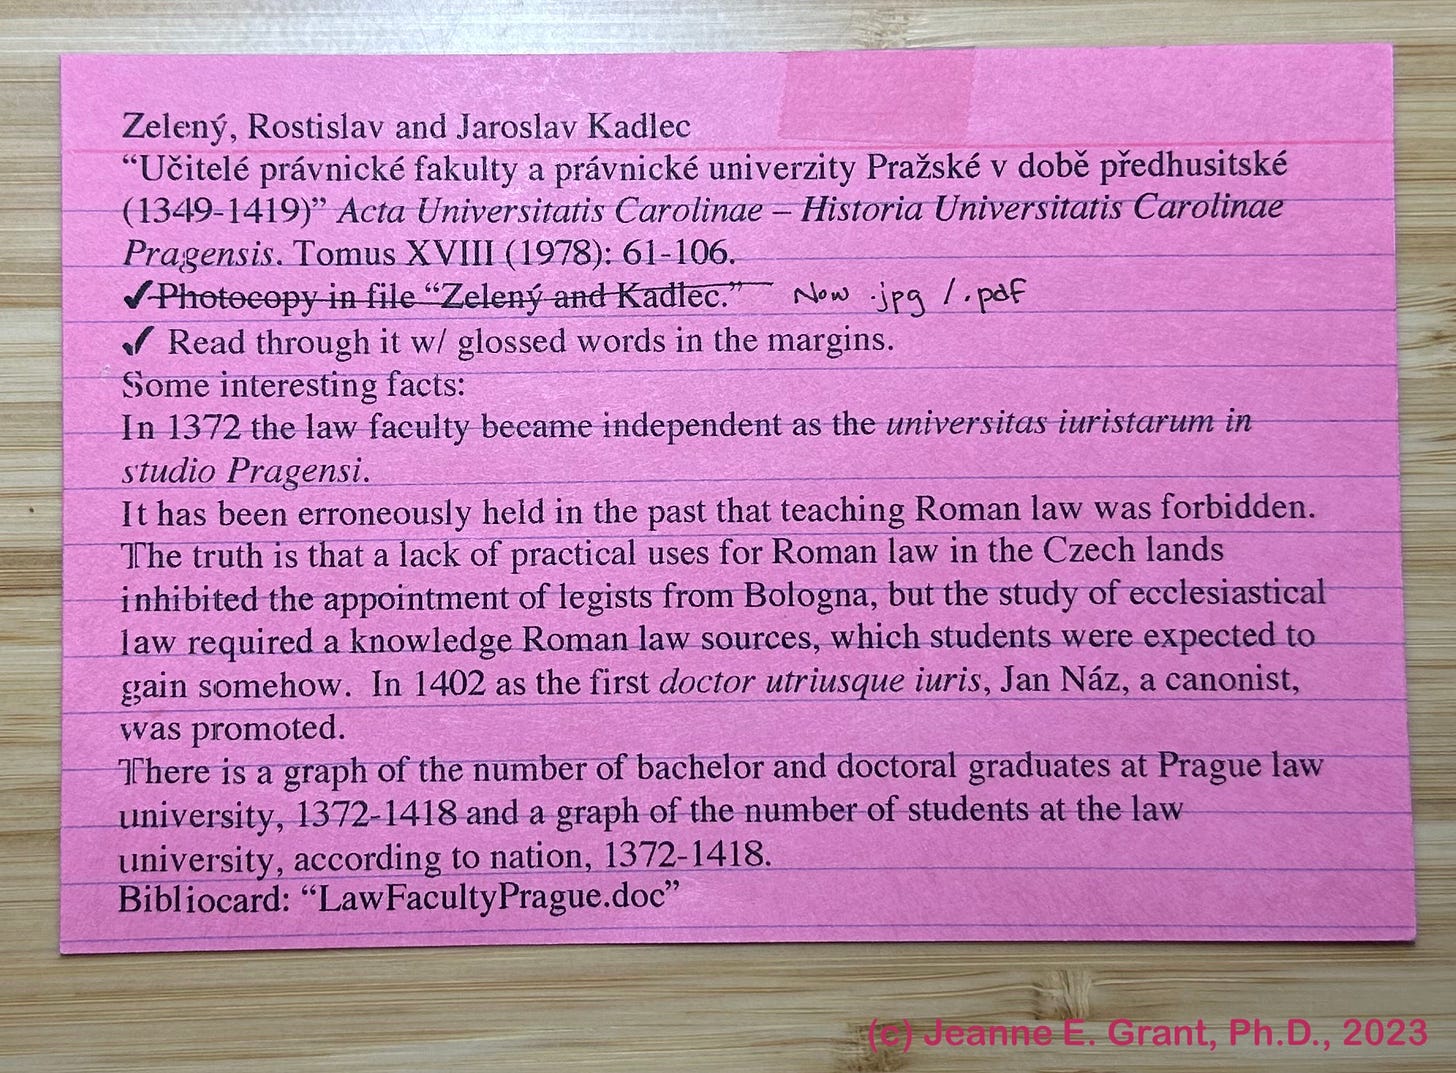 Large pink index card for an article in Czech on the law faculty of Charles University, 1349-1419.